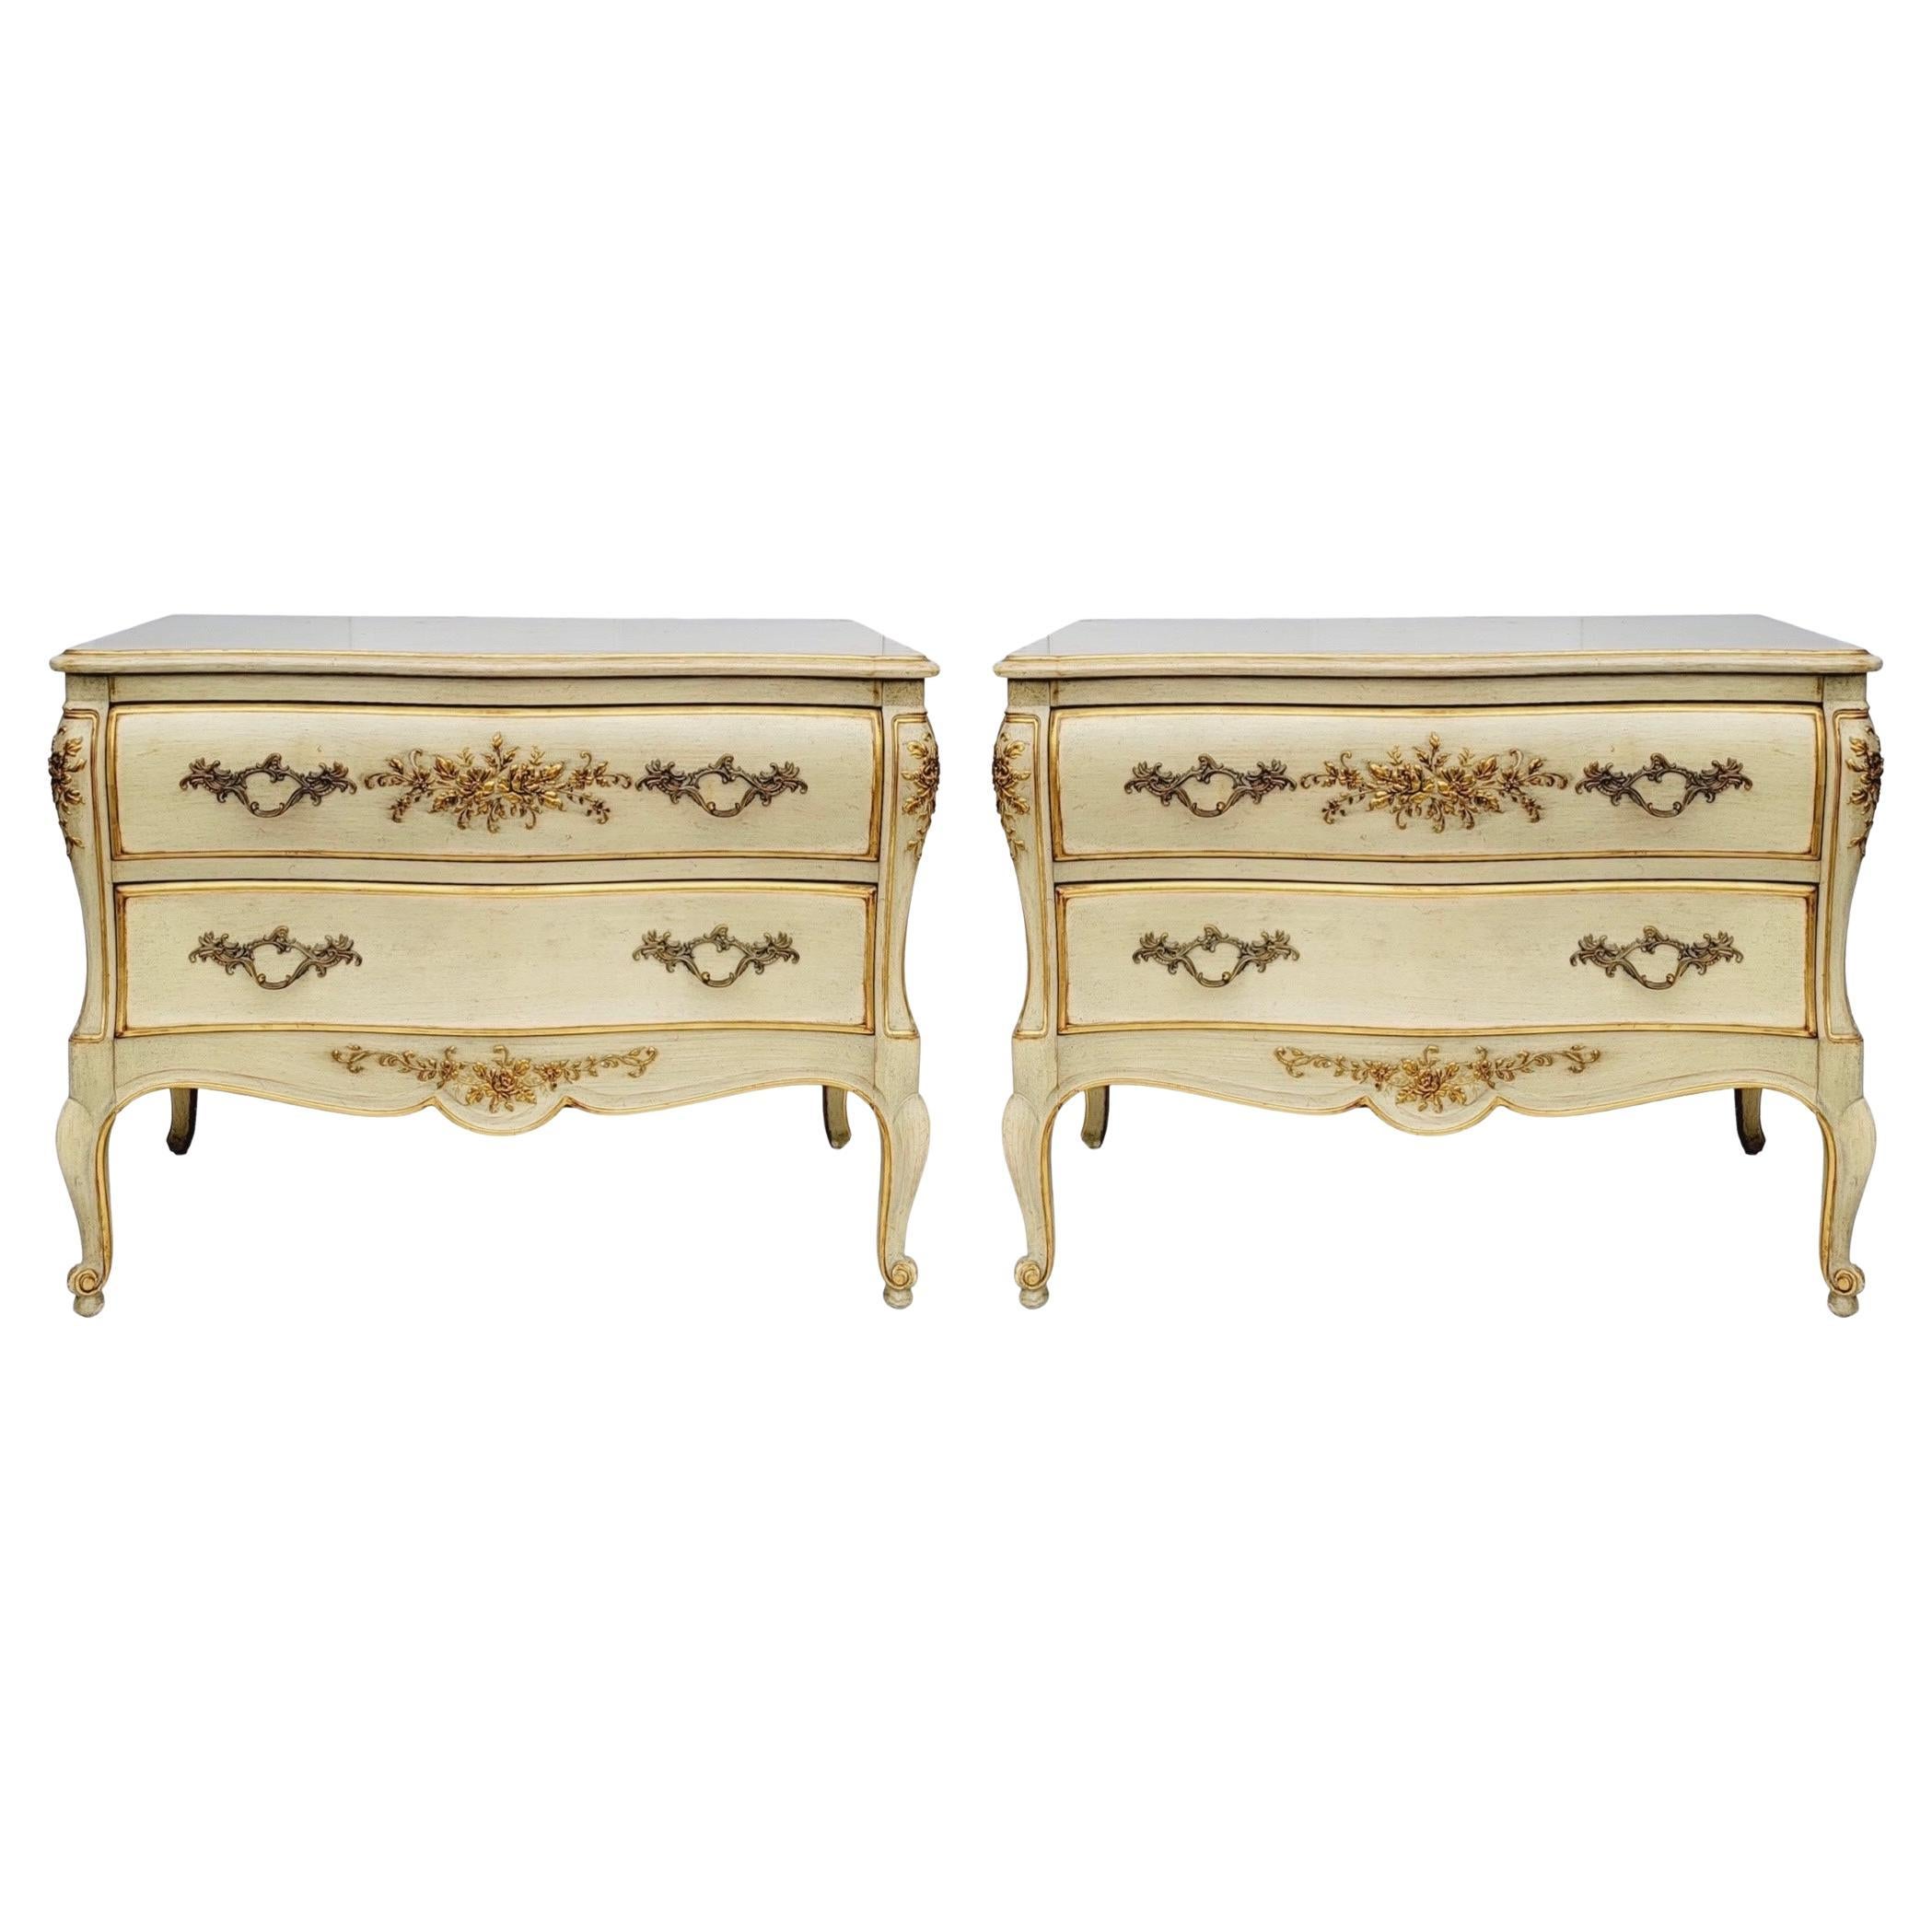 1970s French Louis  XV Style Painted And Gilded Chests / Commodes By Dixon